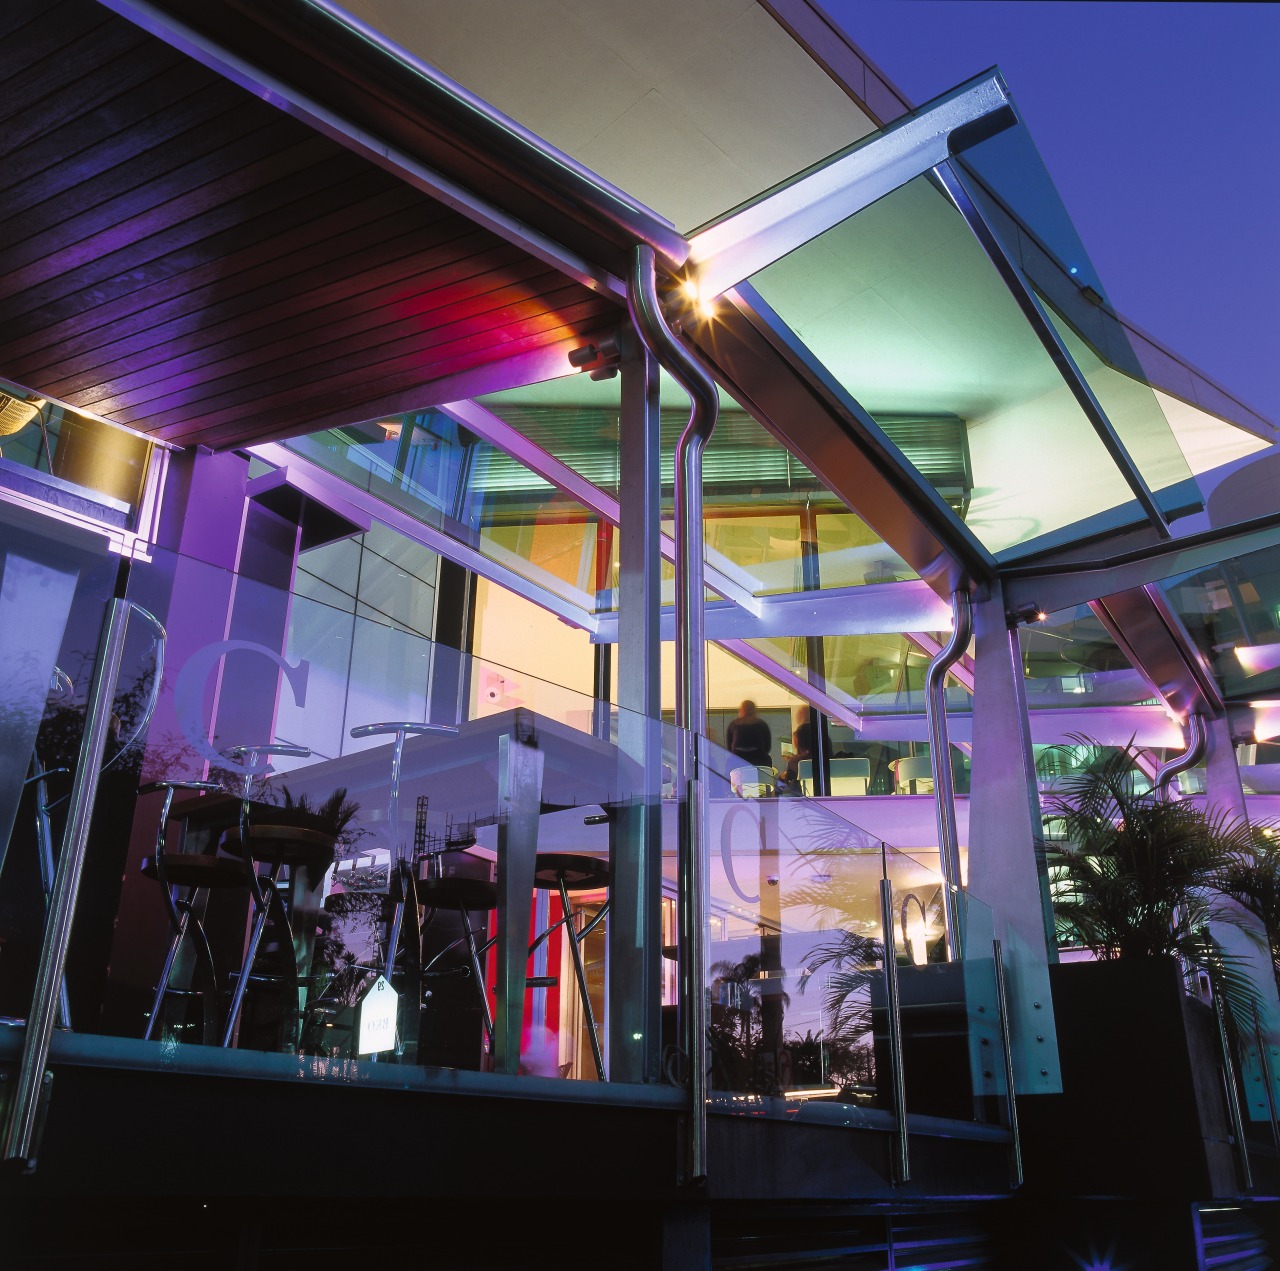 Exterior view of hotel building showing enclosed courtyard architecture, ceiling, light, lighting, night, purple, restaurant, black